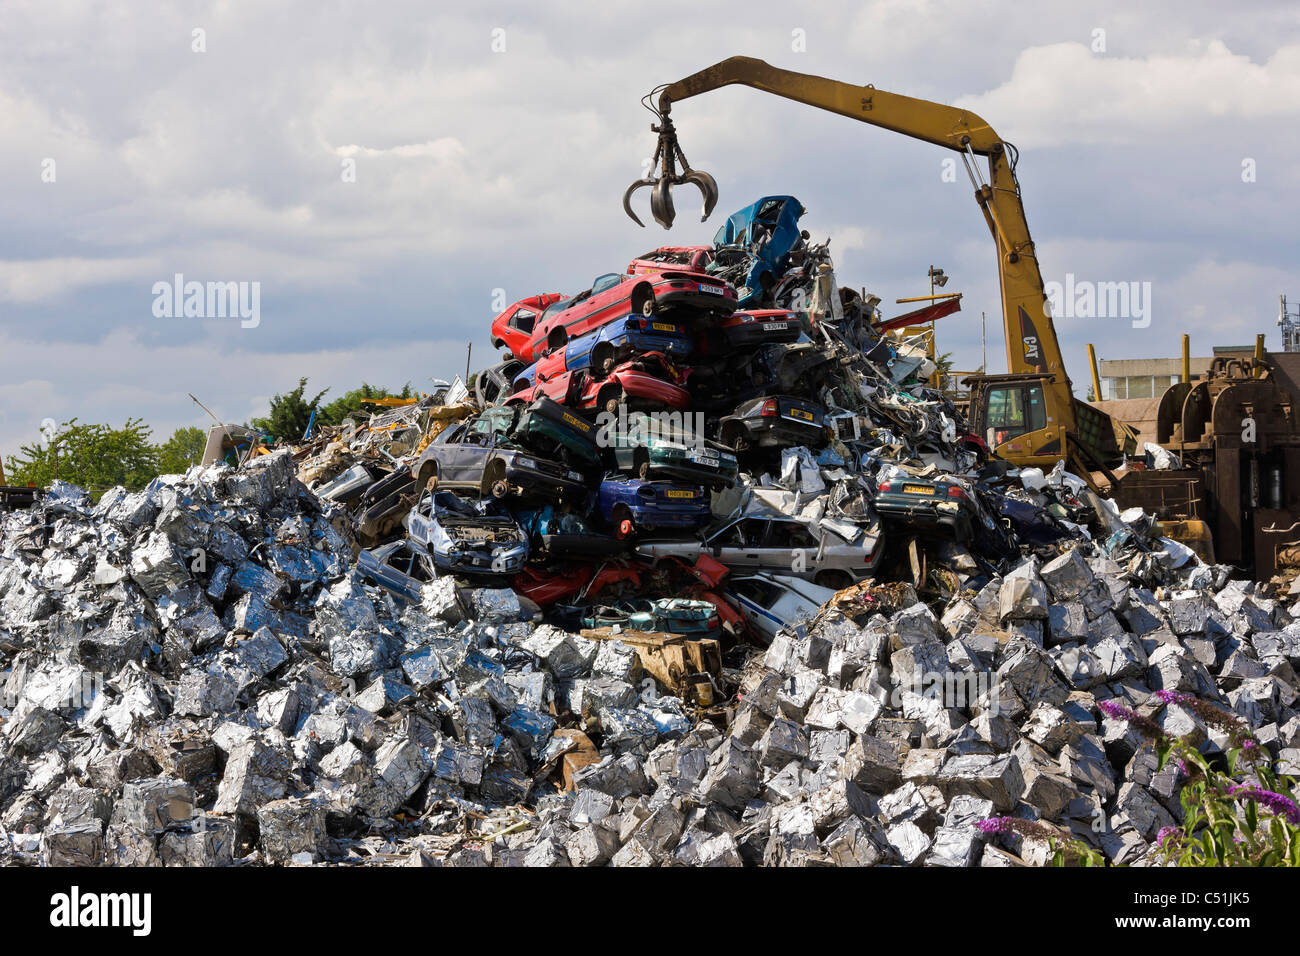 Unwanted old cars scrapped and crushed into cubes at recycling scrapyard. JMH5096 Stock Photo